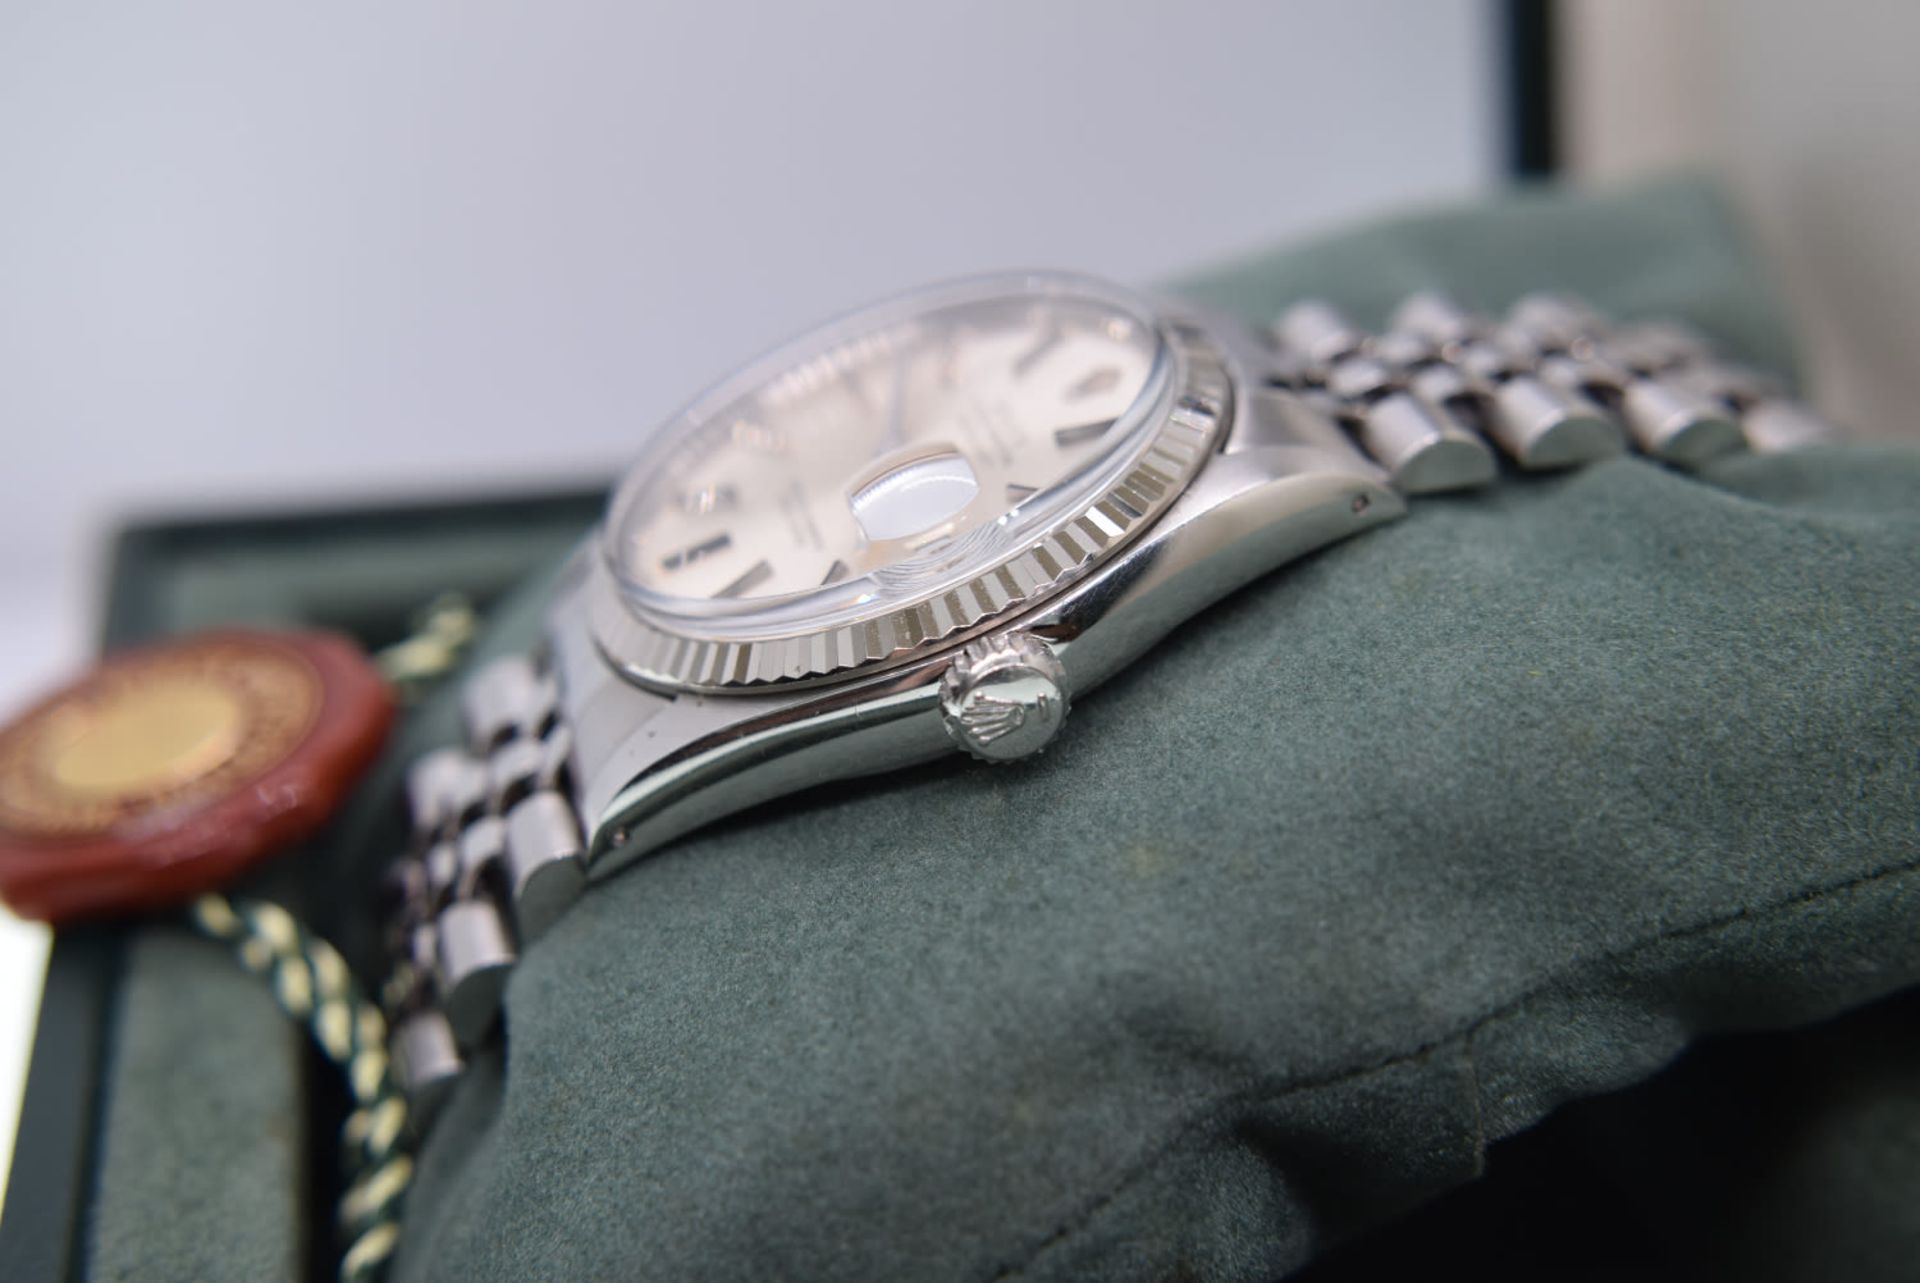 ROLEX DATEJUST 36MM STAINLESS STEEL MODEL WITH JUBILEE BRACELET (SILVER DIAL, FLUTED BEZEL) - Image 2 of 8